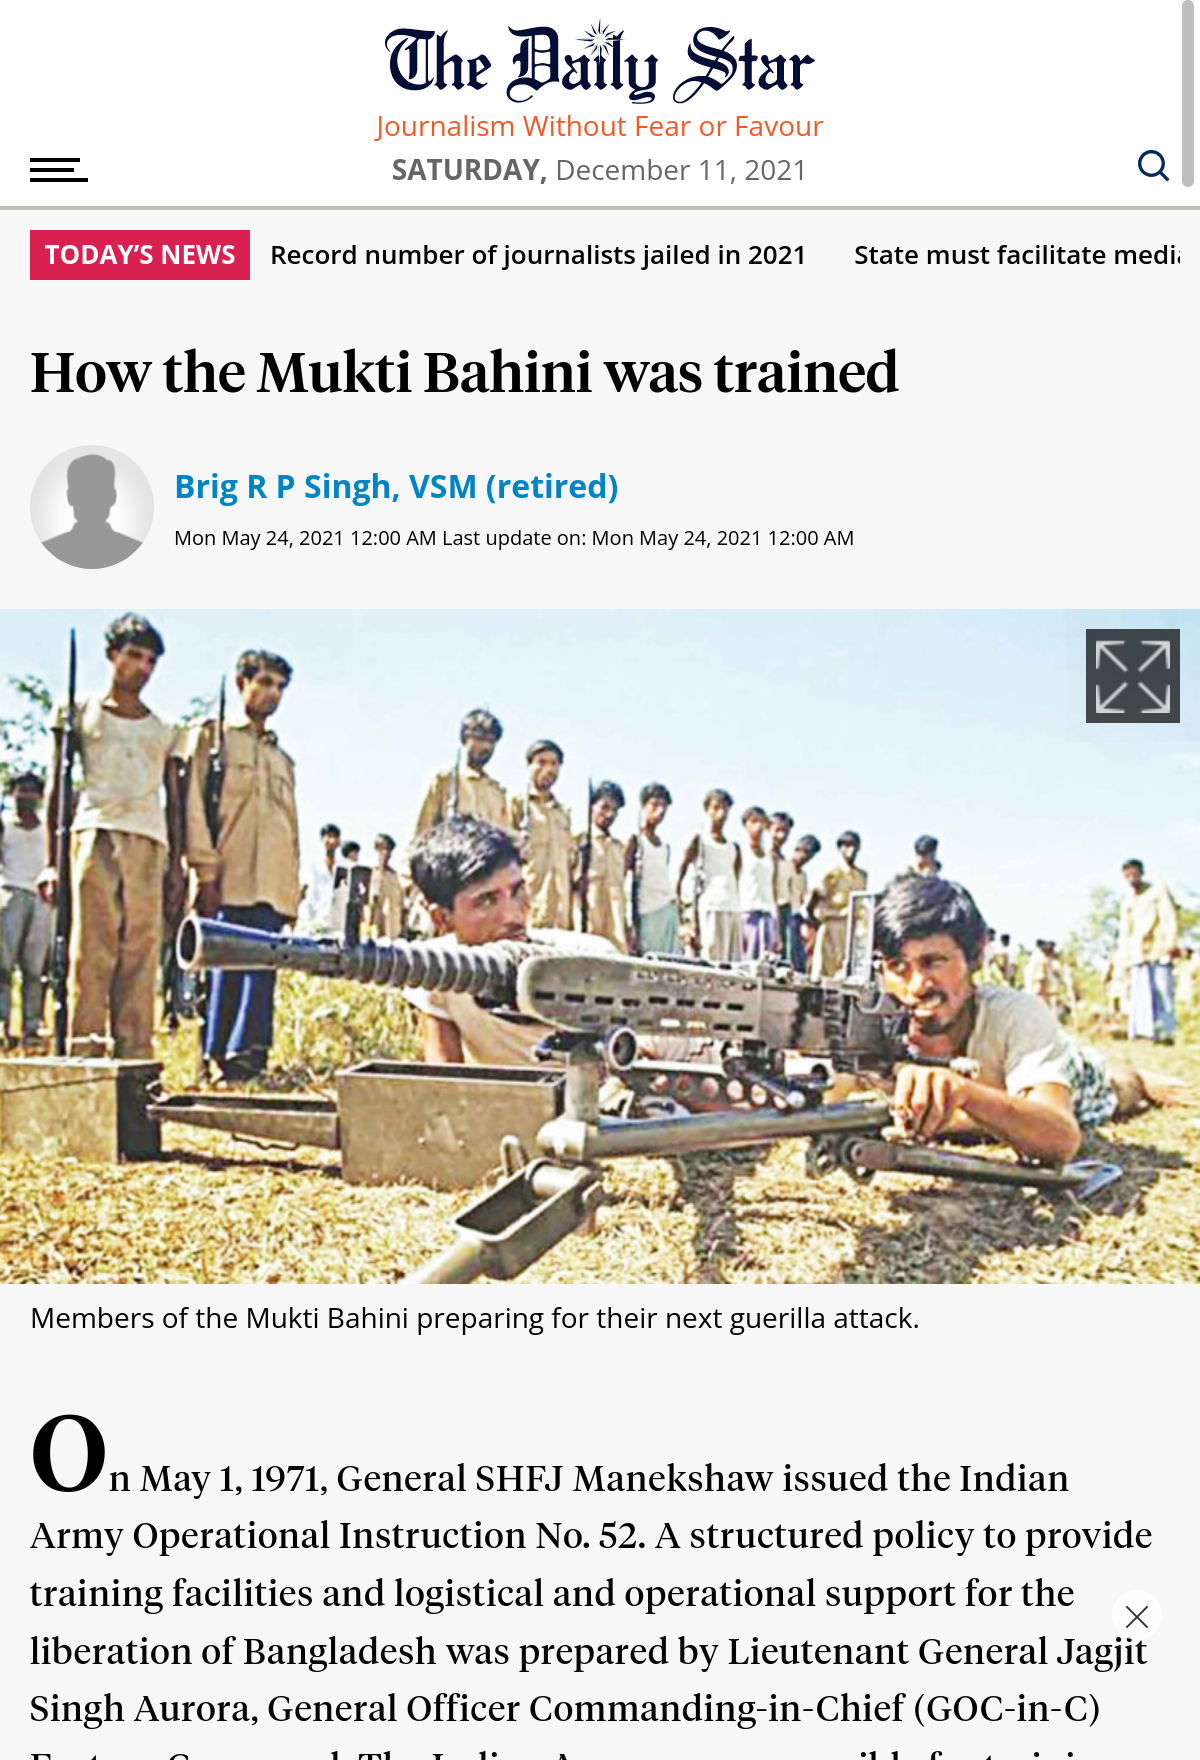 The Daily Star - How the Mukti Bahini was trained